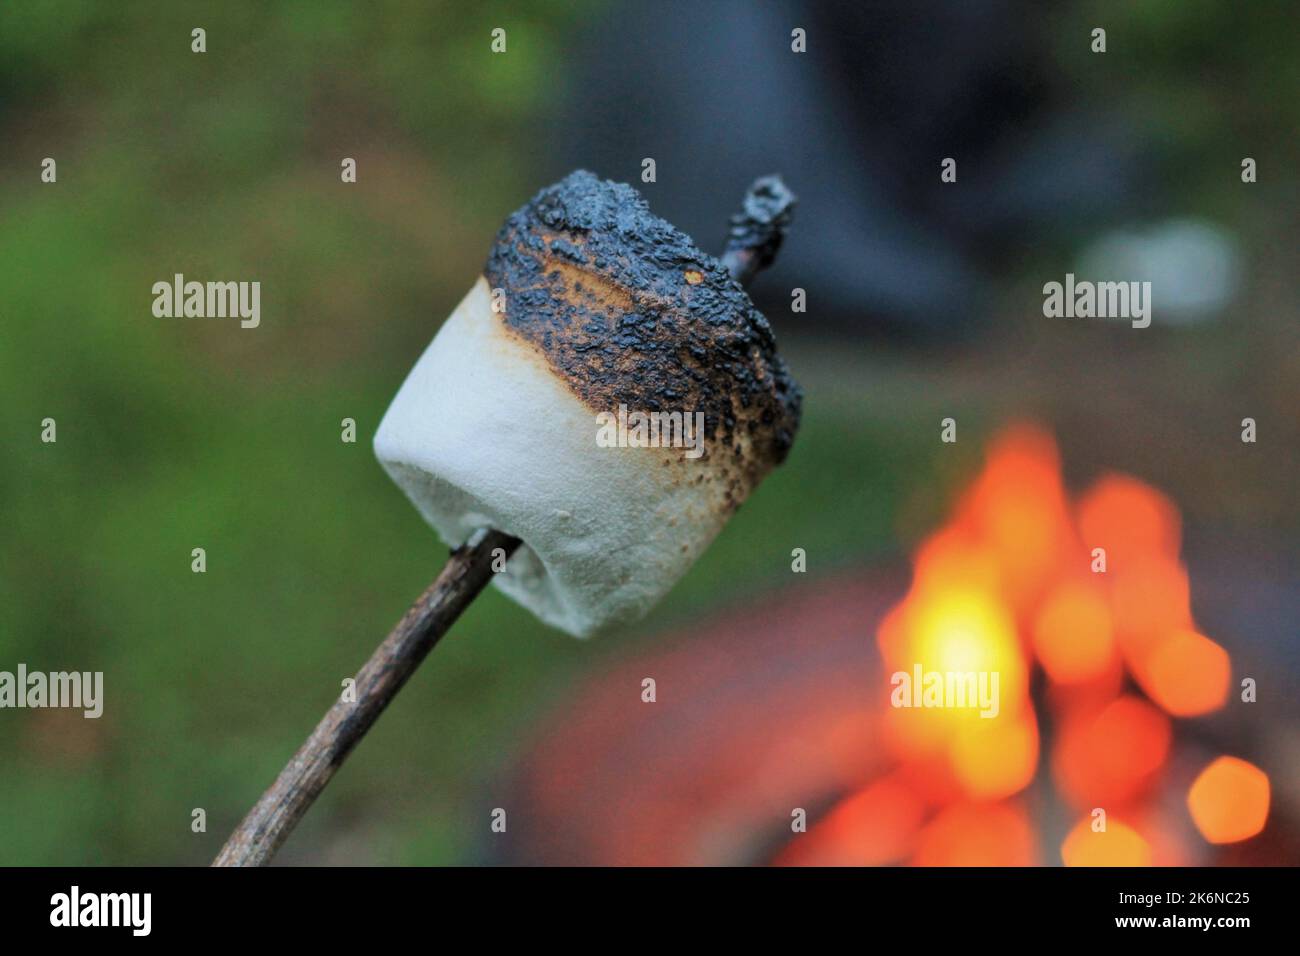 Roasted Marshmallow On Stick by the Fire Stock Photo